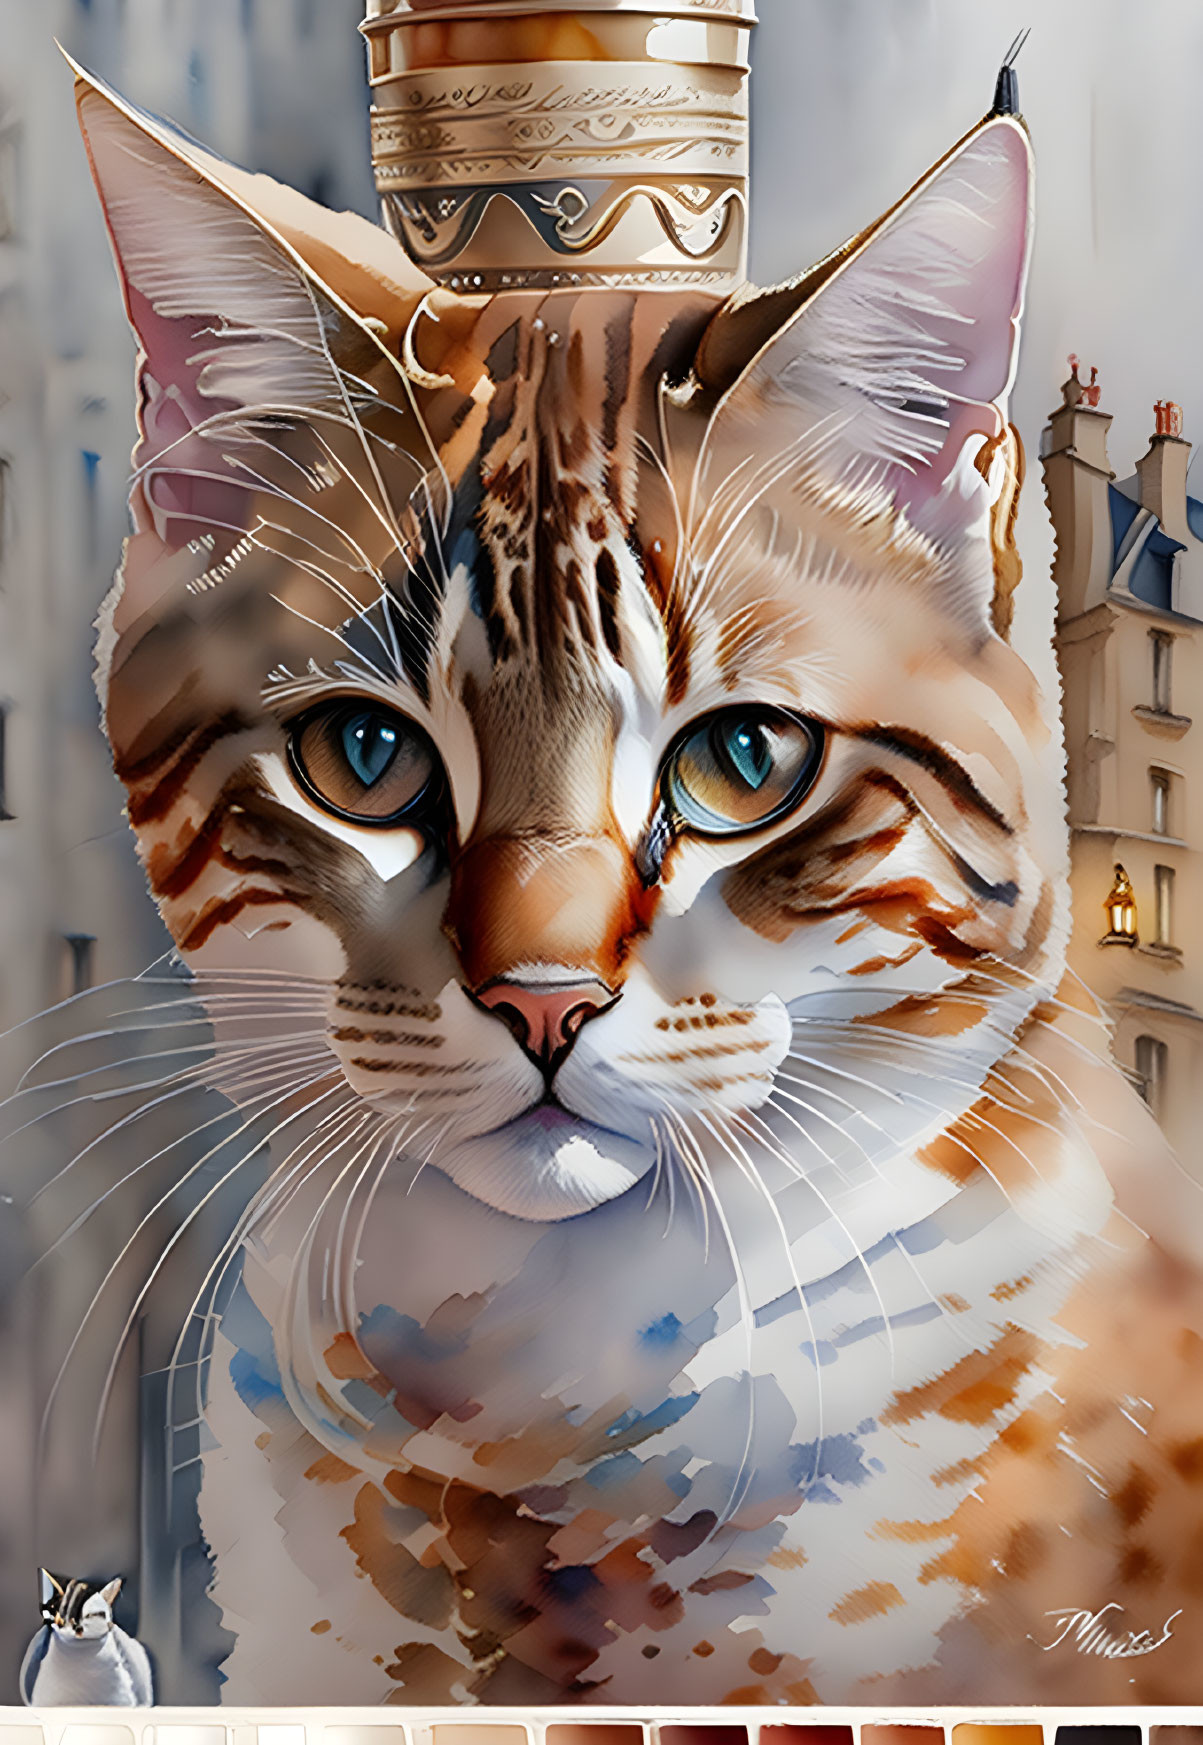 Digital art: Majestic tabby cat with crown overlooking smaller cat and European buildings